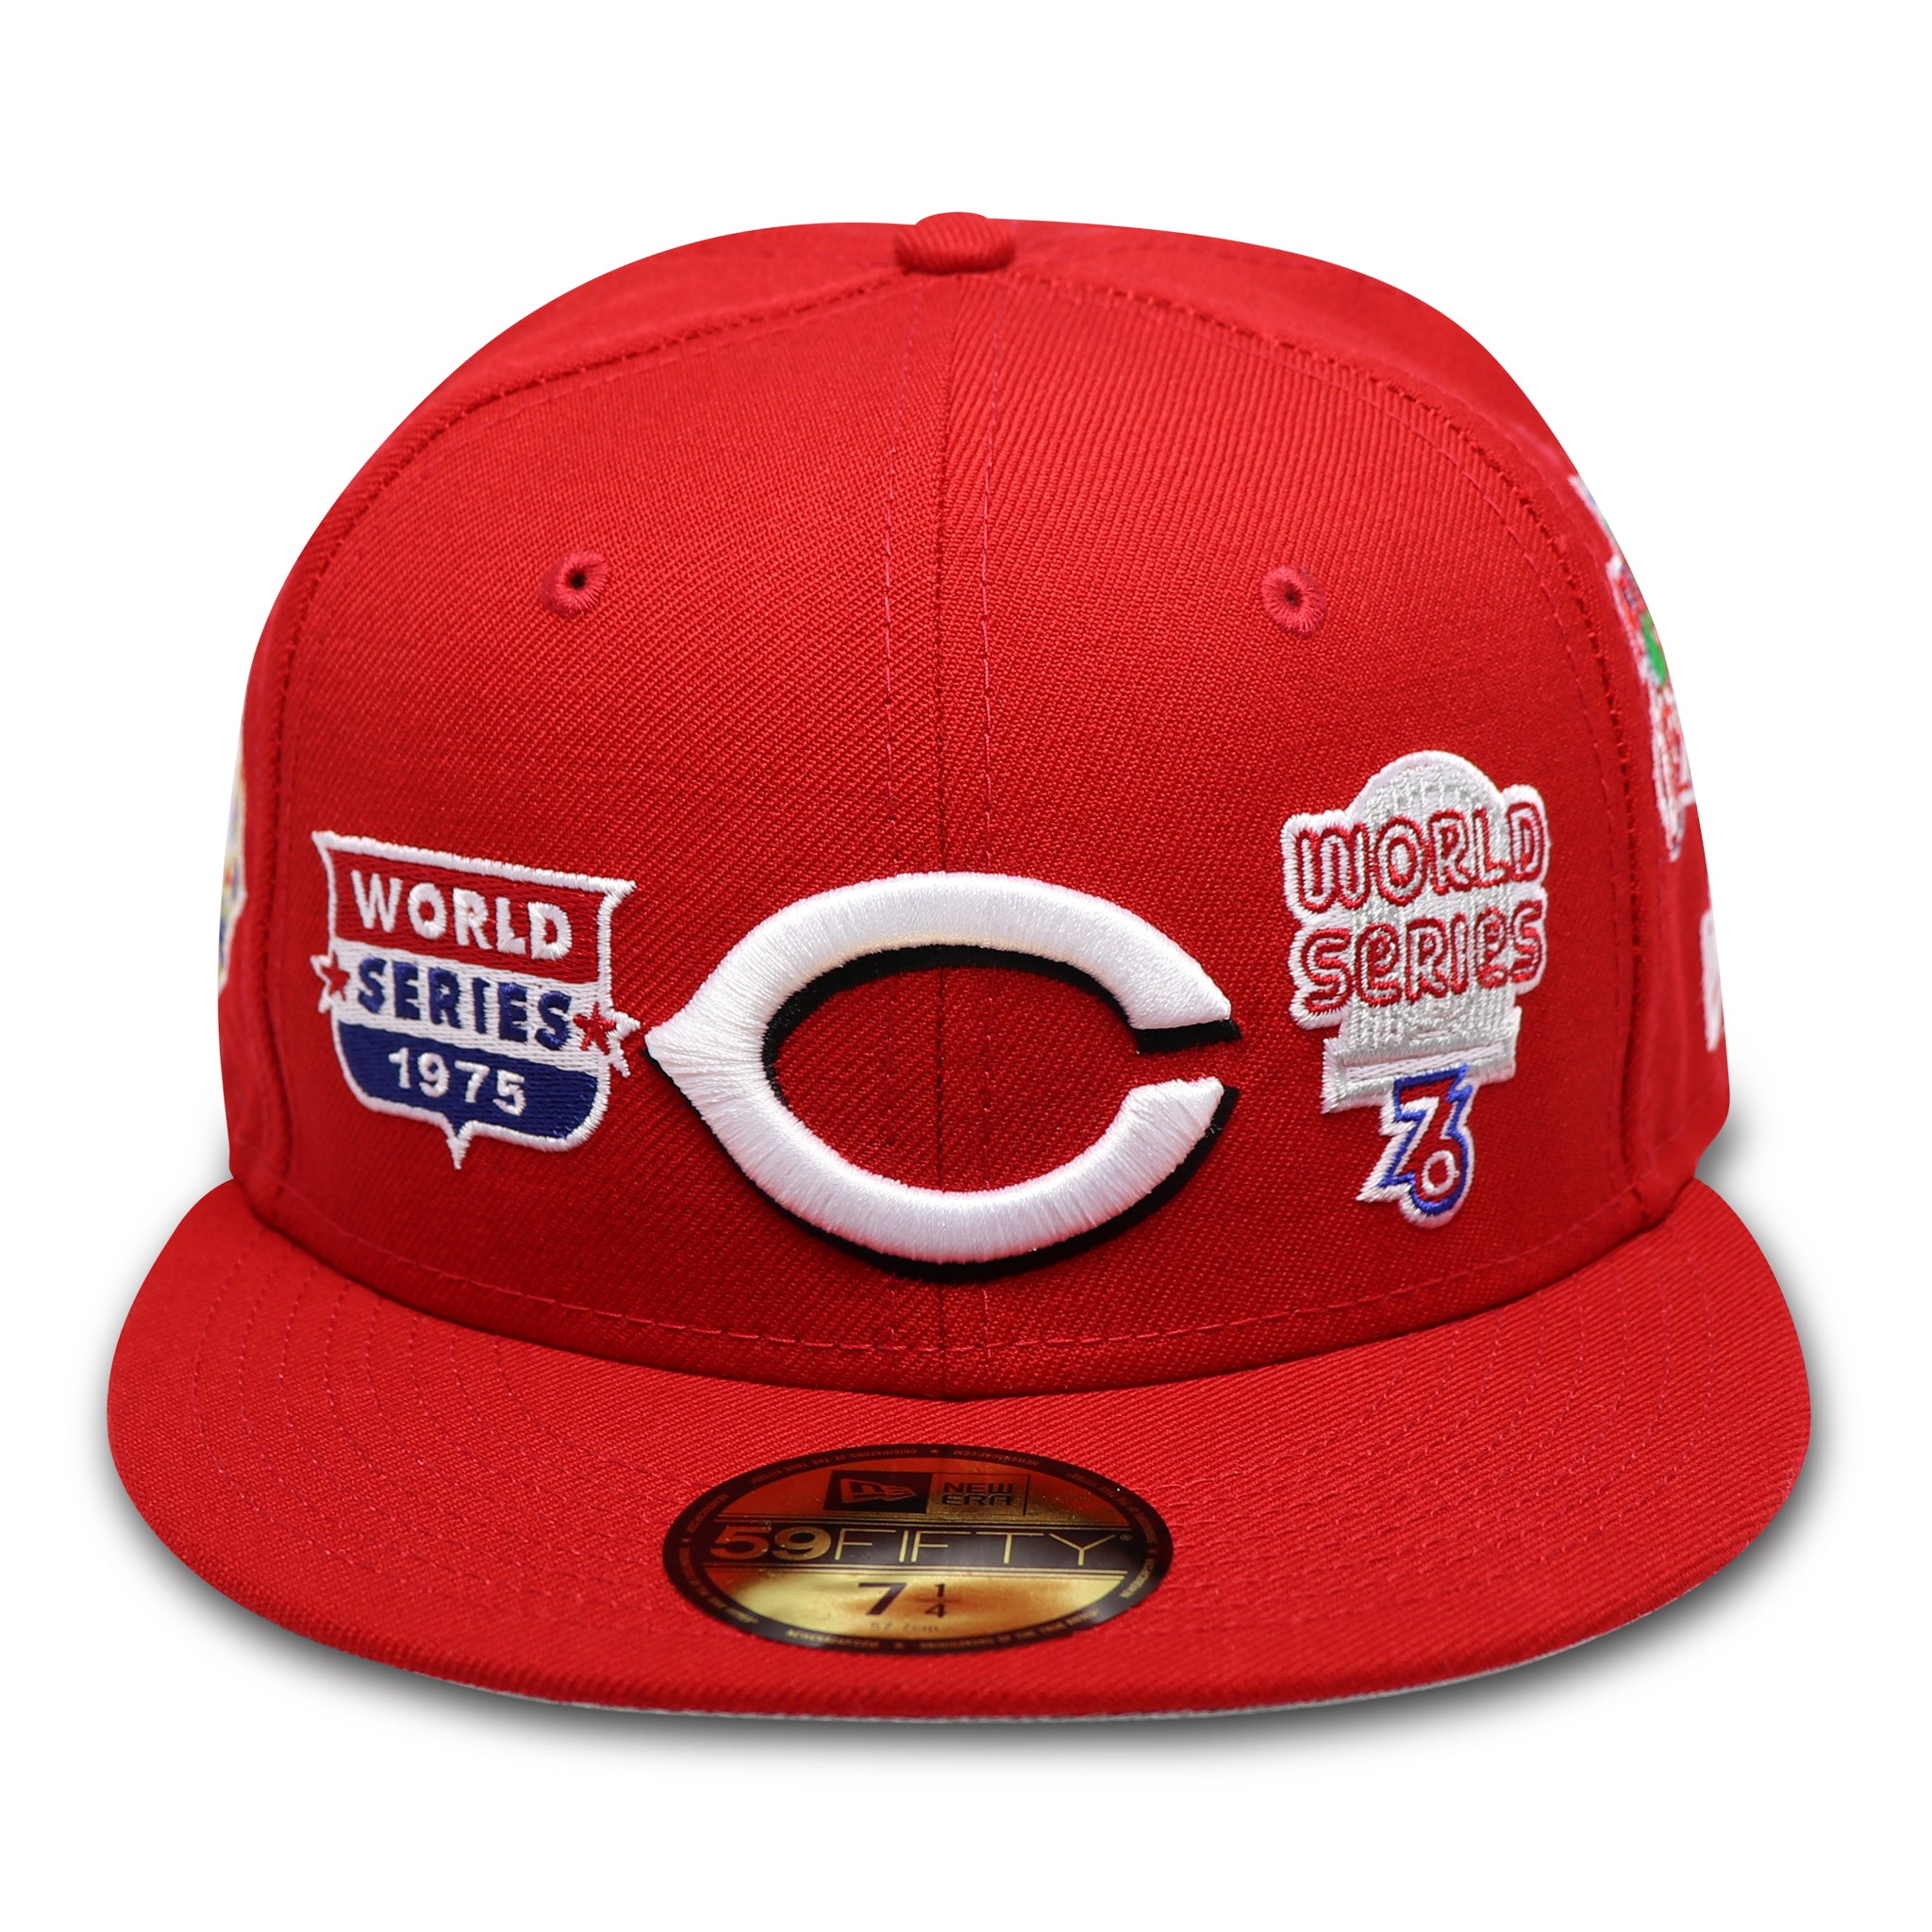 CINCINATTI REDS (5X CHAMPIONS) NEW ERA 59FIFTY FITTED